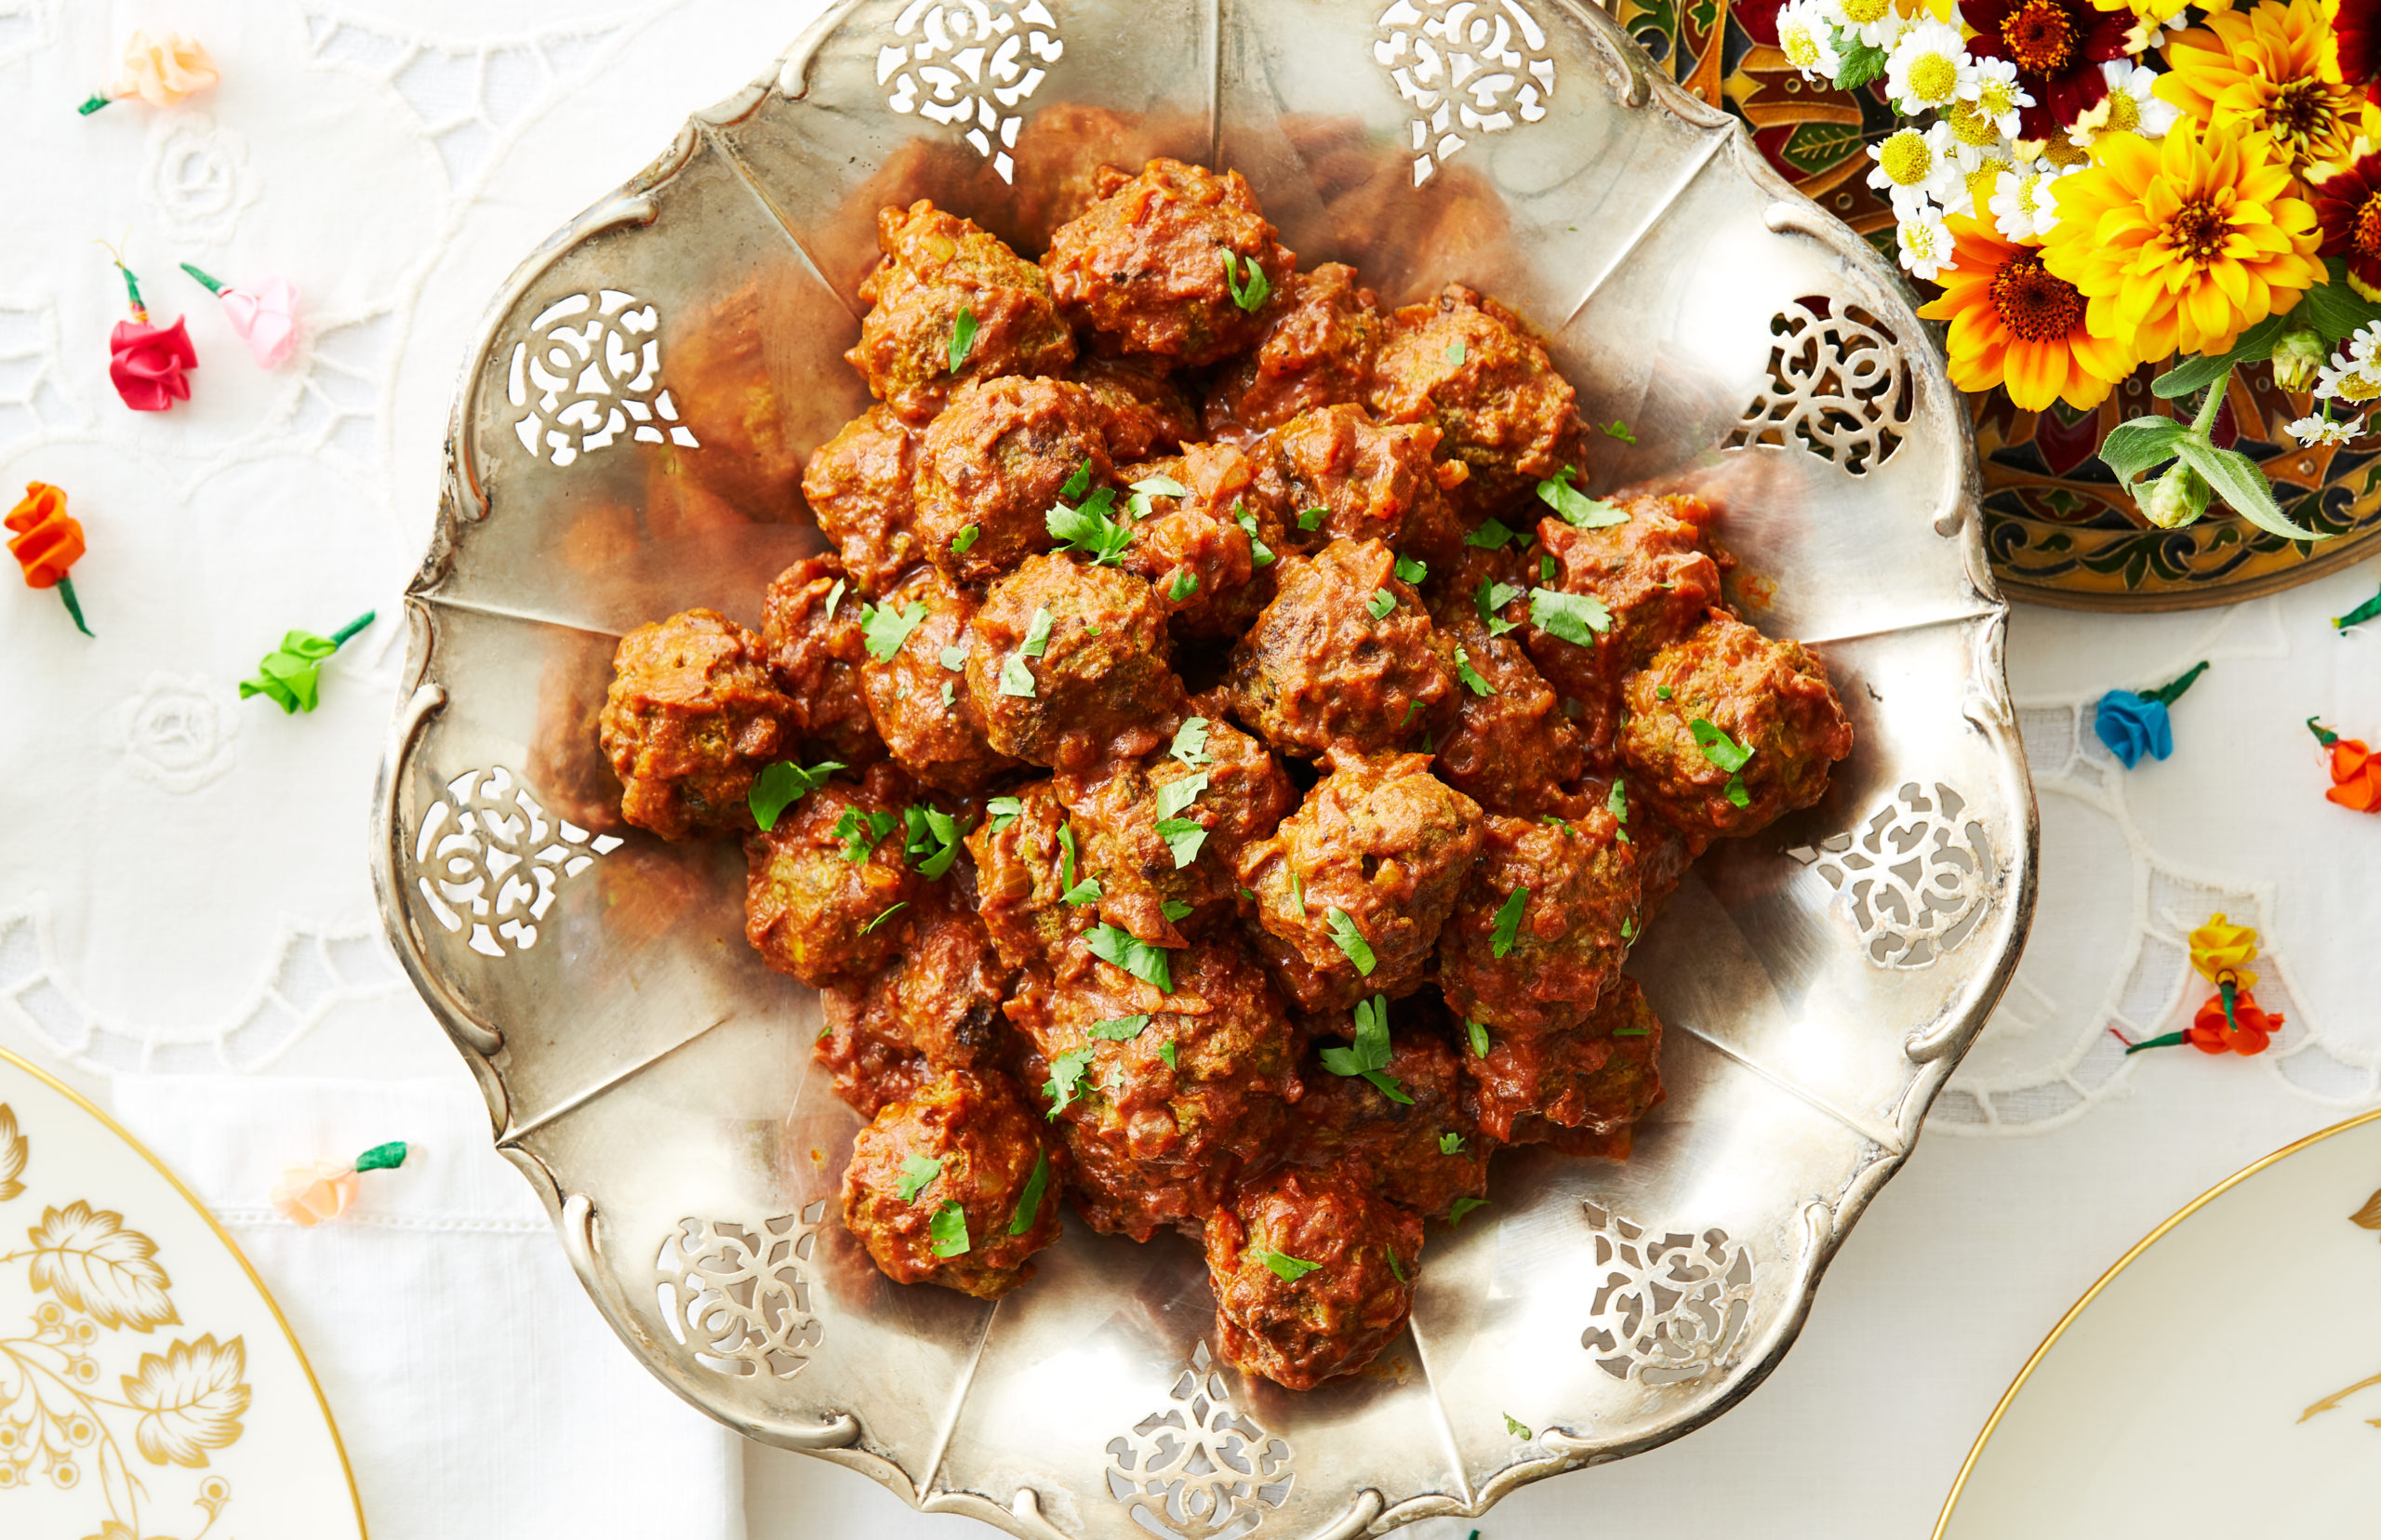 Indian Bagdadi meatballs in a curry sauce